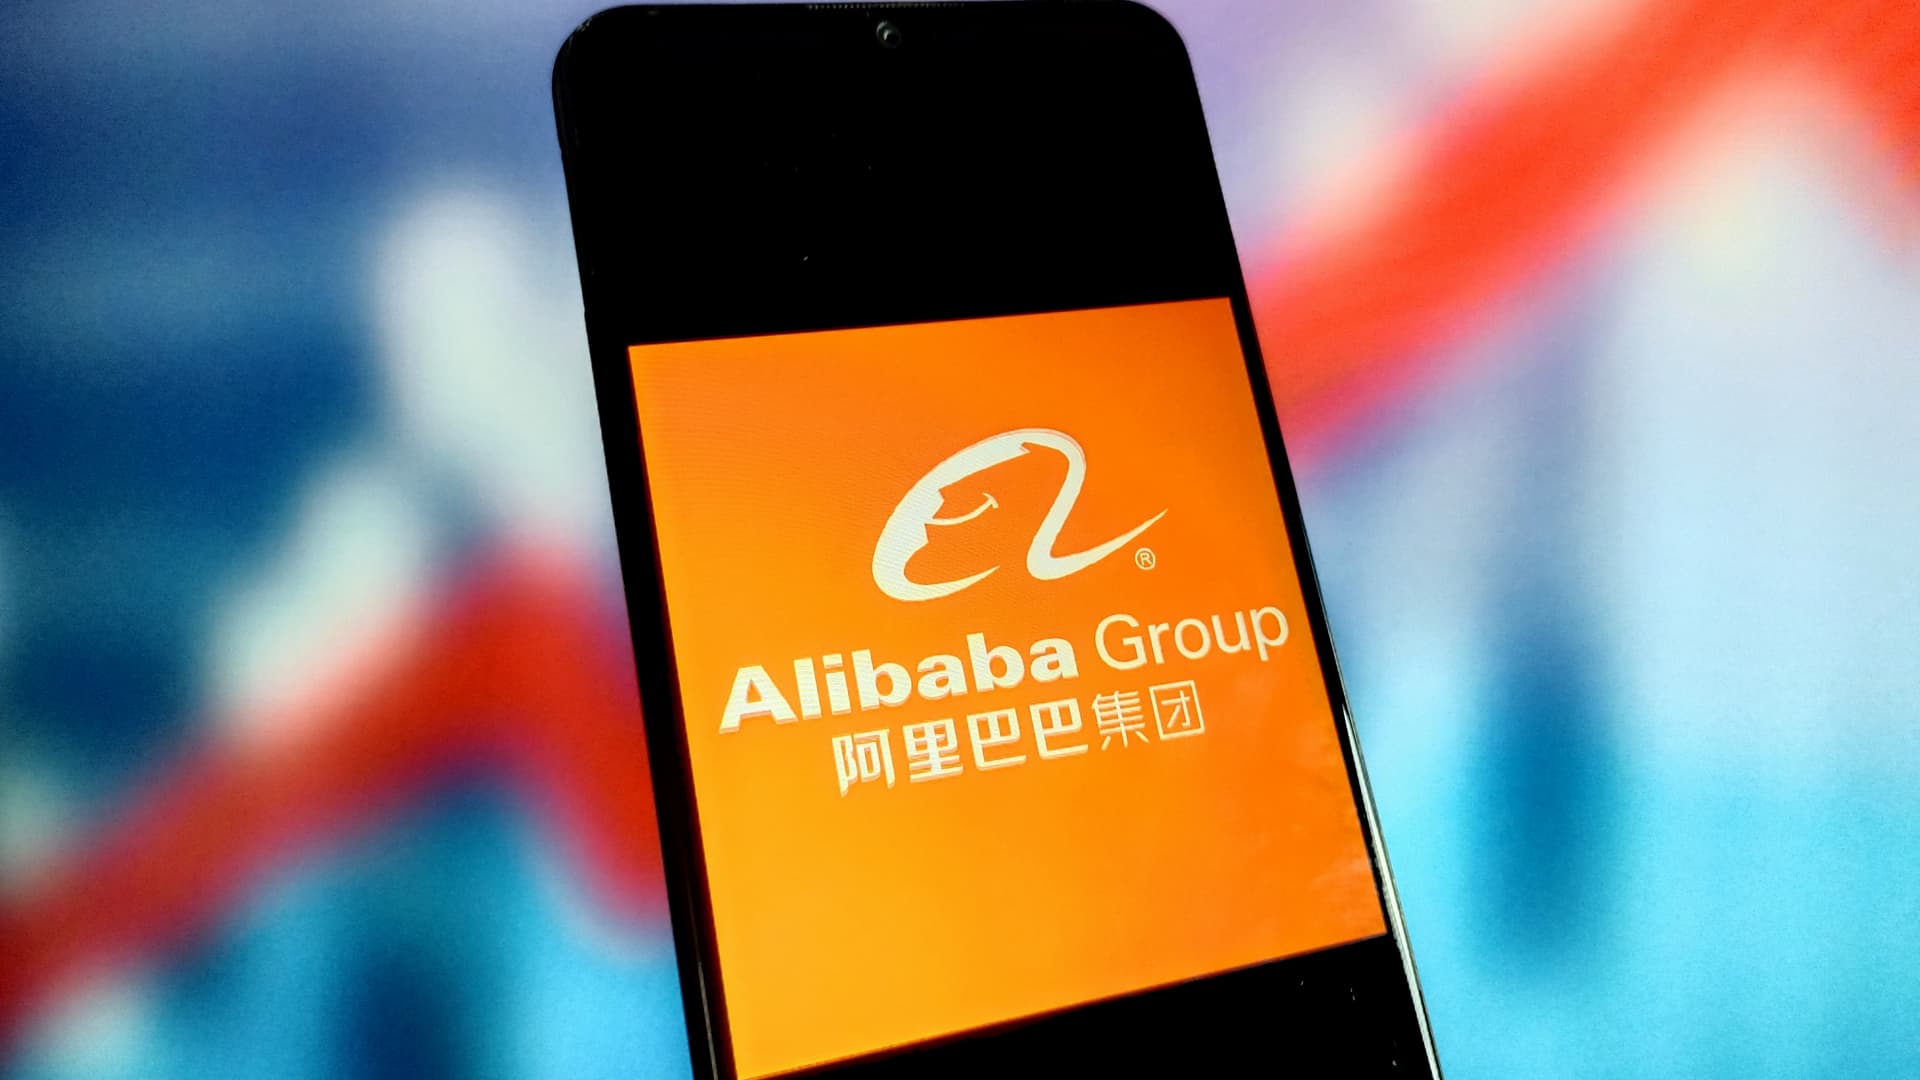 Alibaba shares whipsaw in premarket trade after revenue miss, $25 billion boost to buyback plan